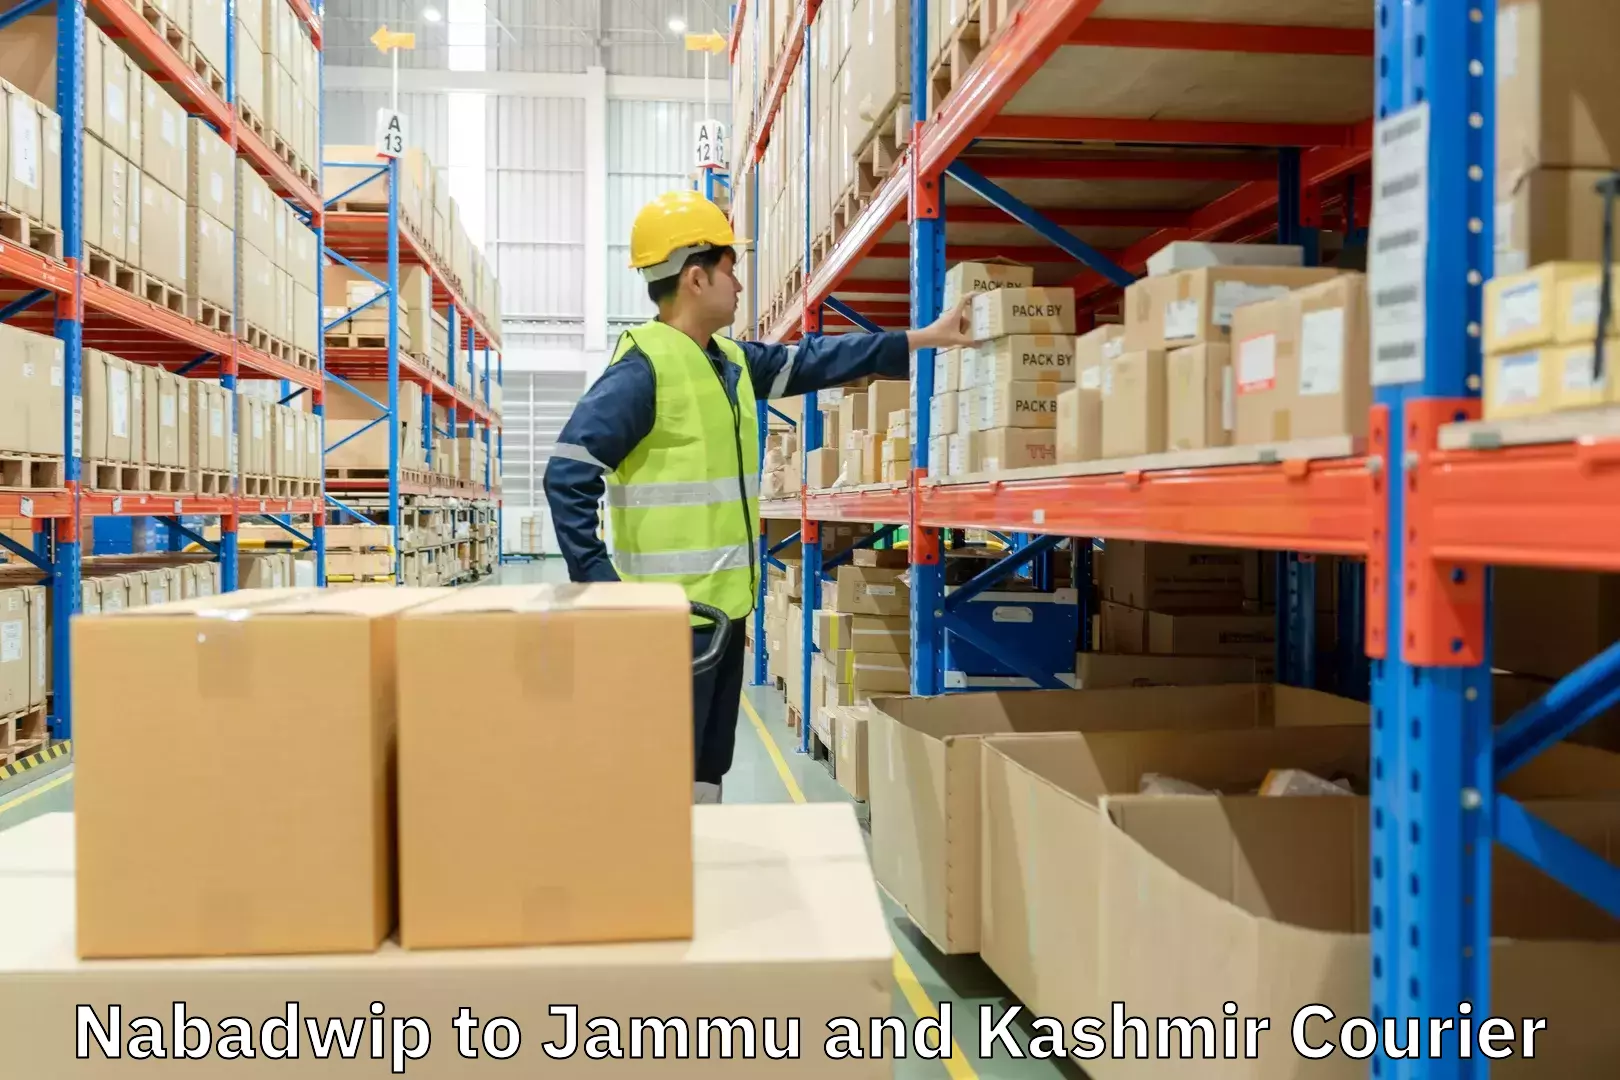 Cost-effective courier options Nabadwip to Jammu and Kashmir